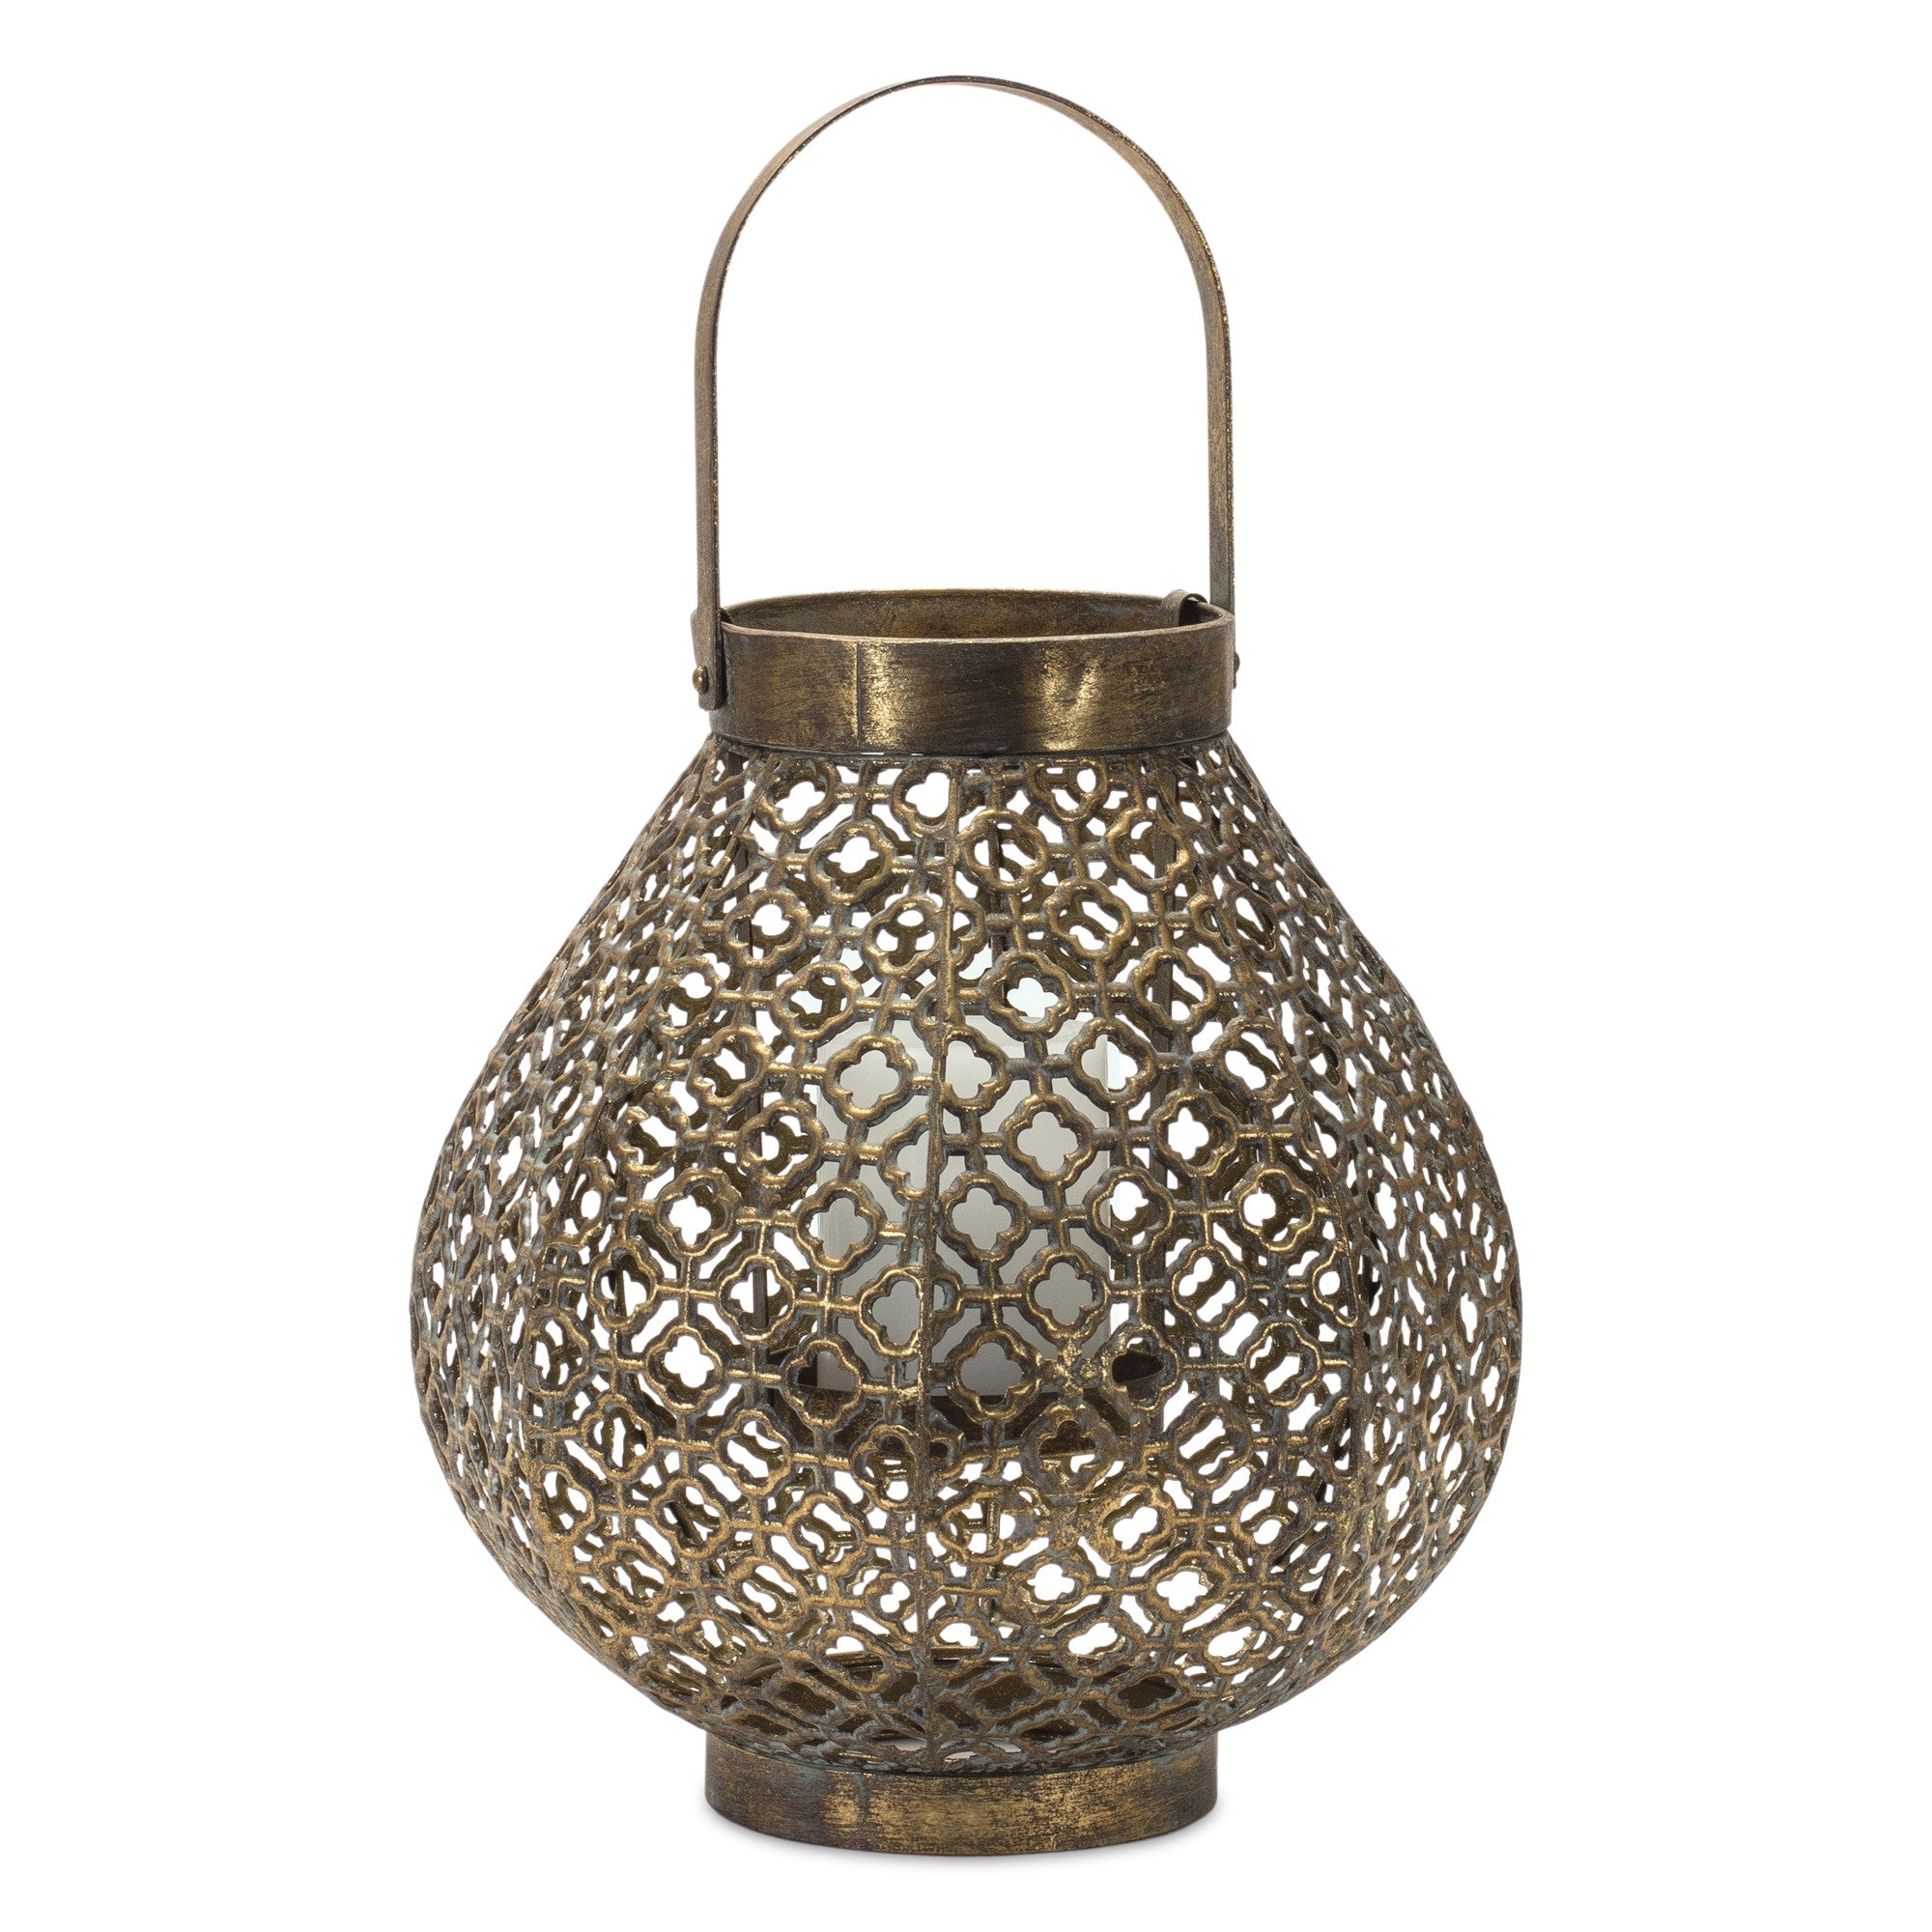 12" Gold Flameless Tabletop Lantern Candle Holder